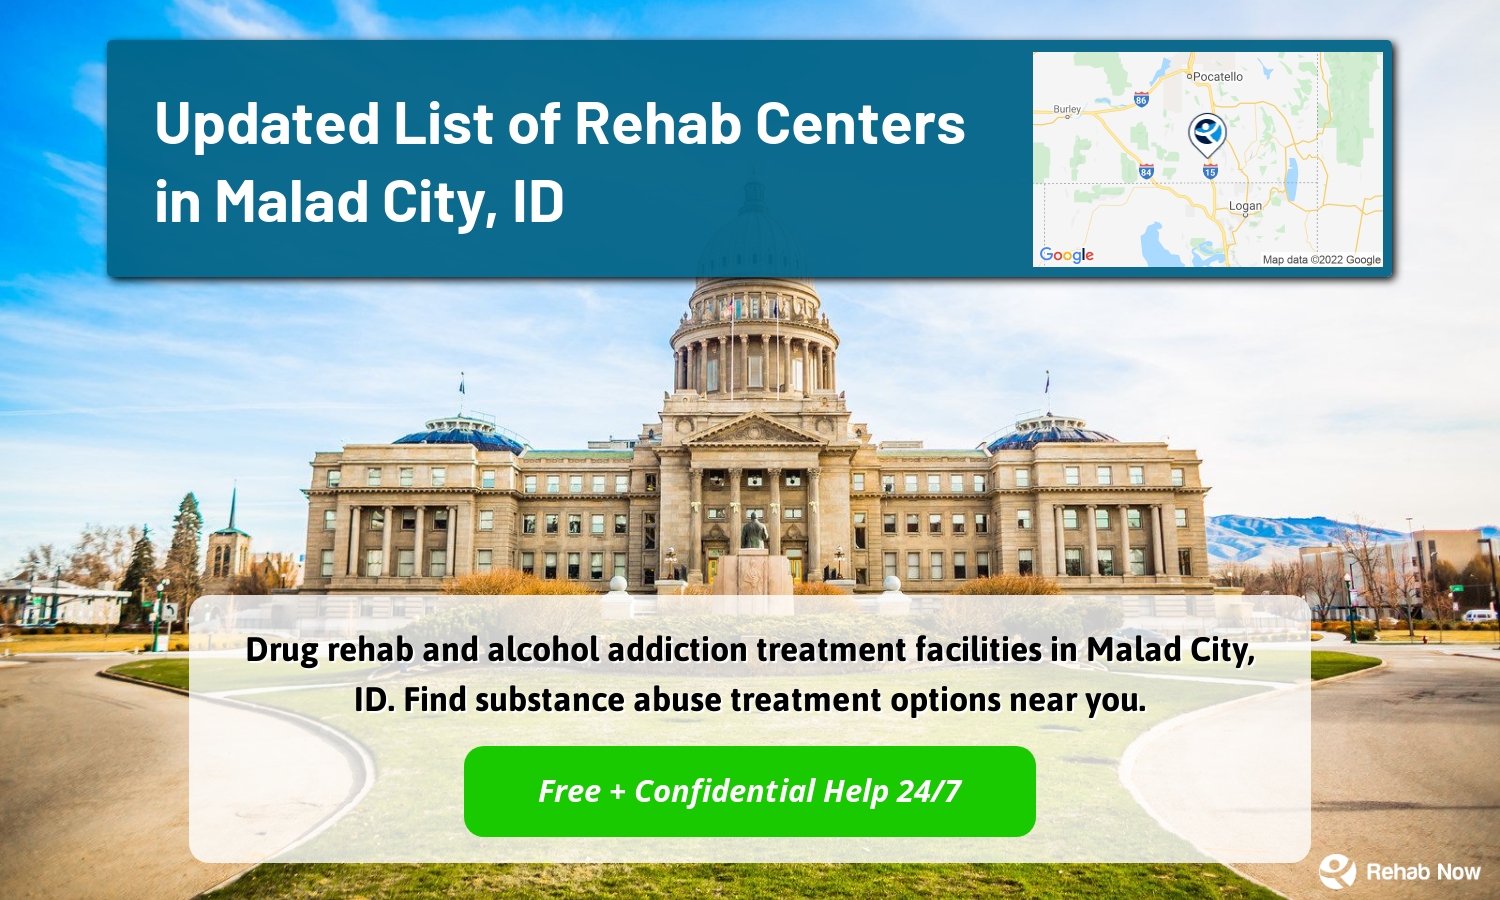 Drug rehab and alcohol addiction treatment facilities in Malad City, ID. Find substance abuse treatment options near you.